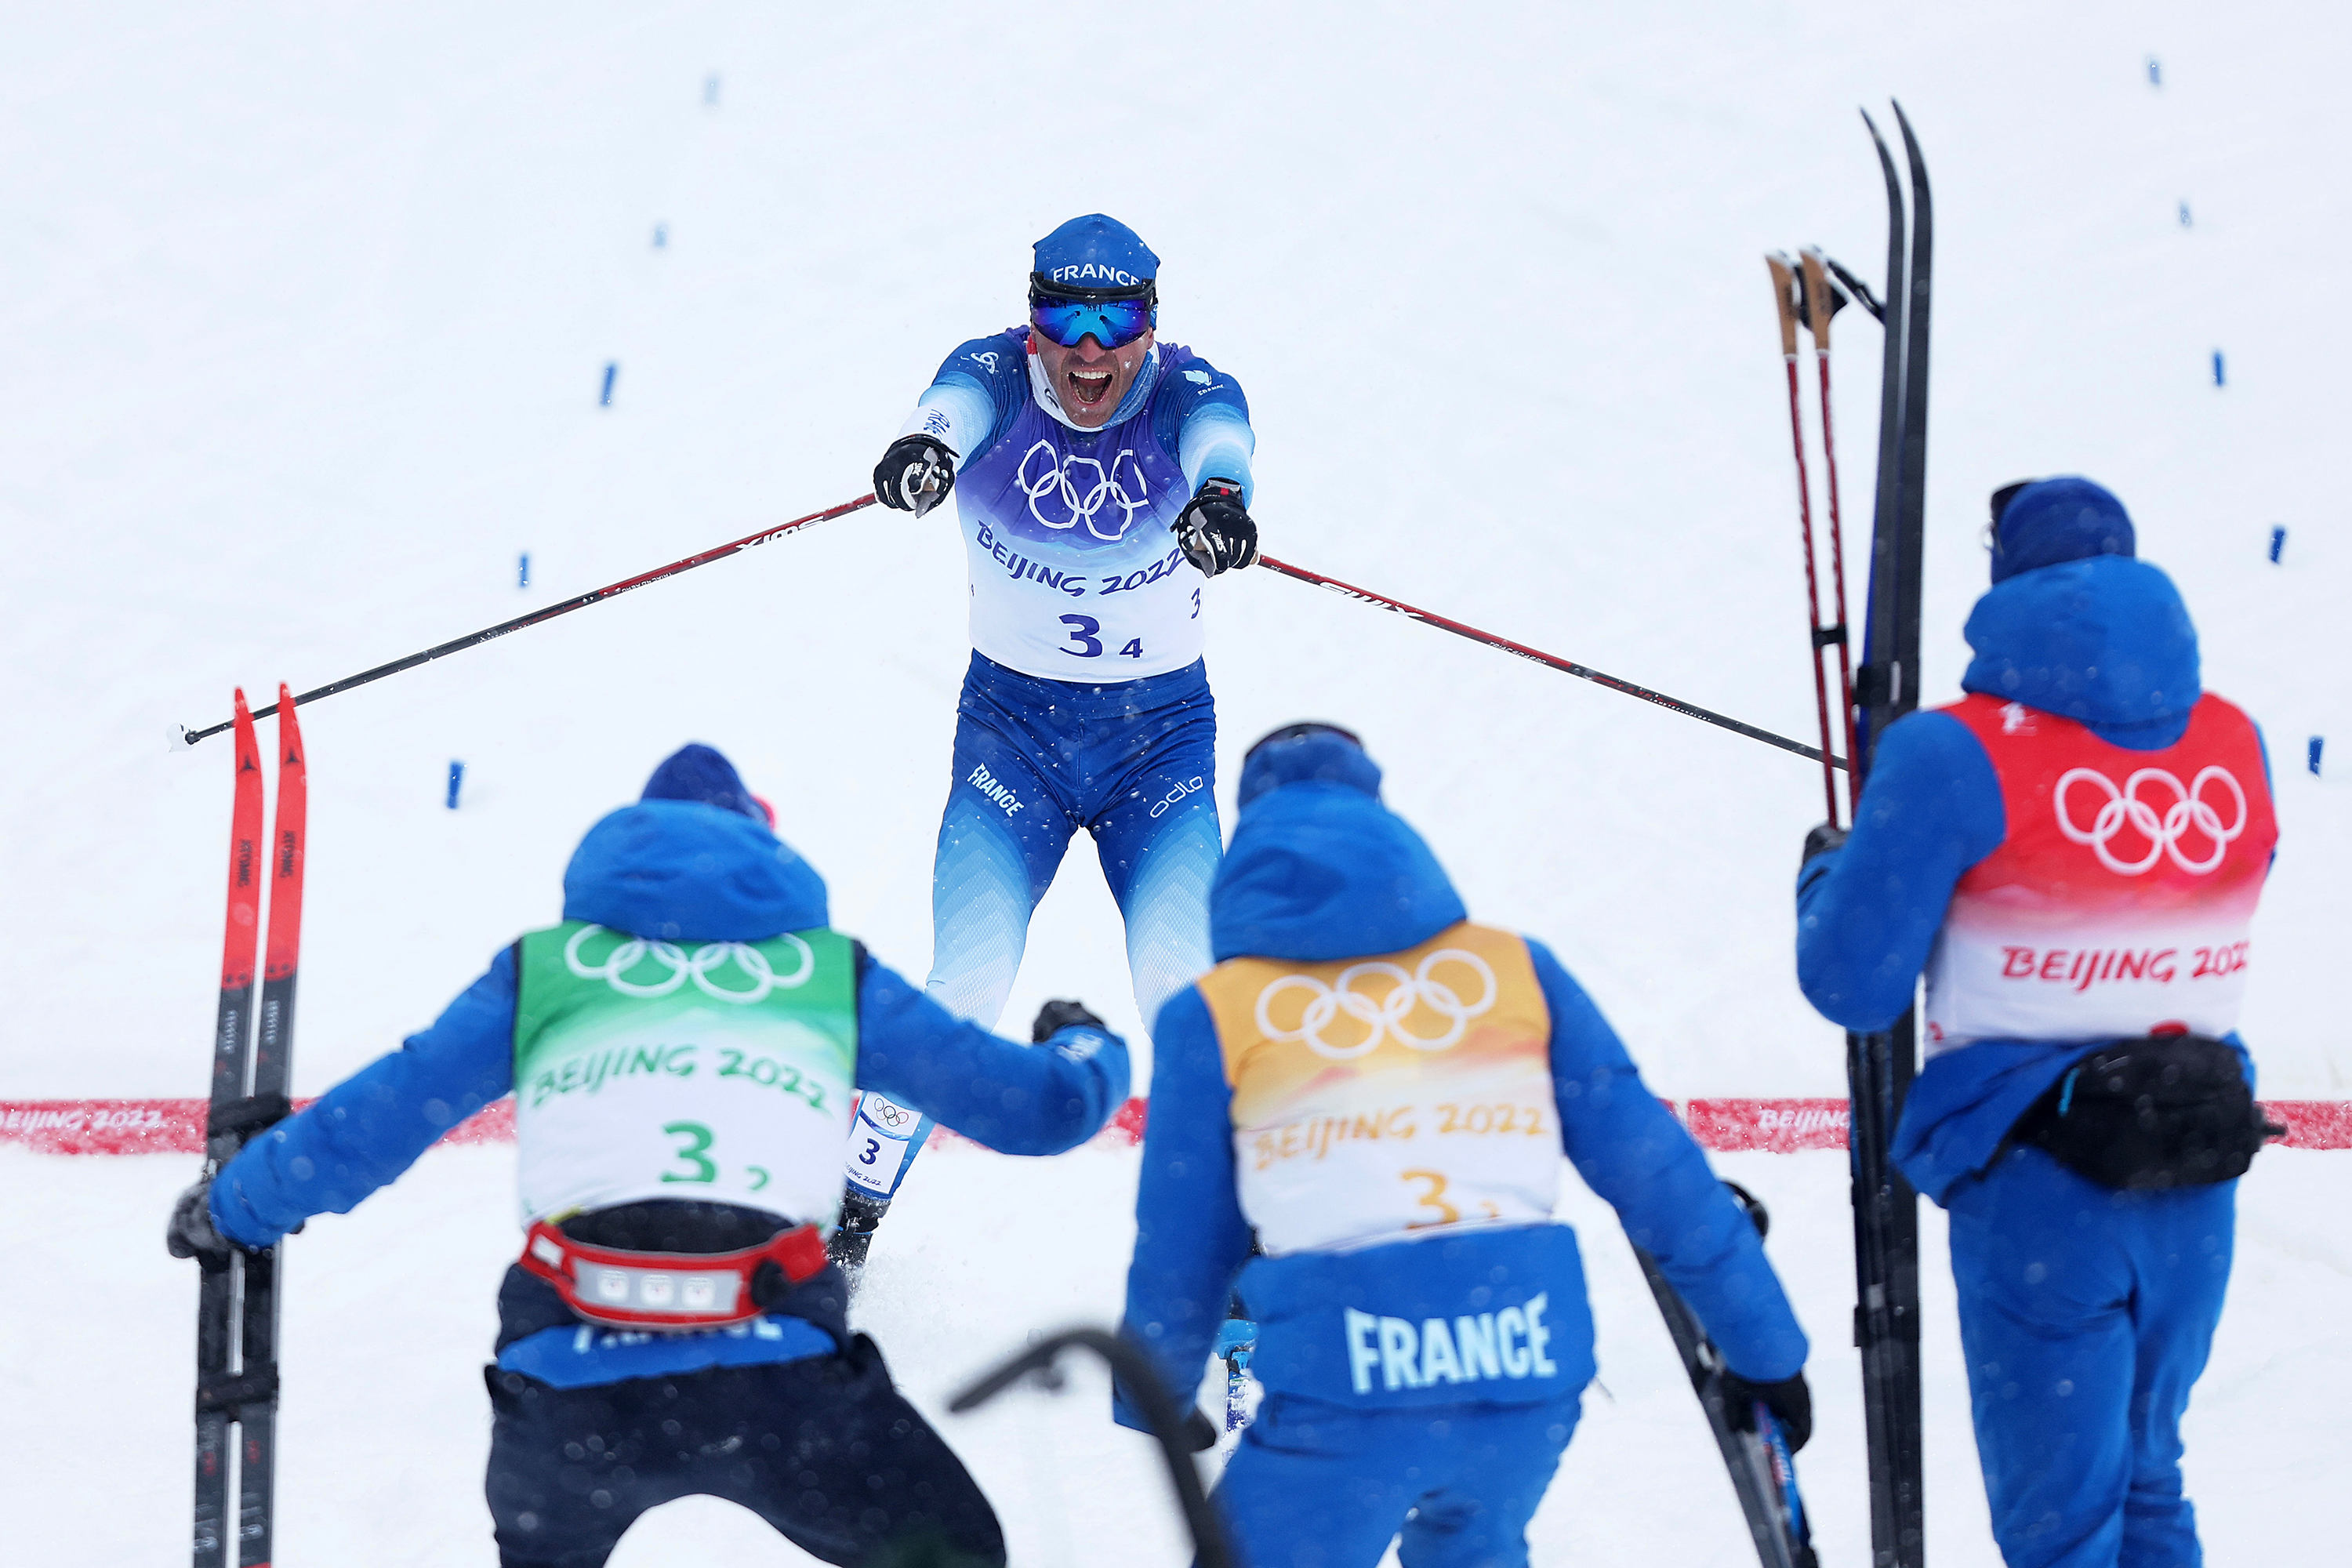 France’s Maurice Manificat celebrates with his teammates after winning the bronze medal in the men’s cross-country skiing 4x10km relay on Sunday.